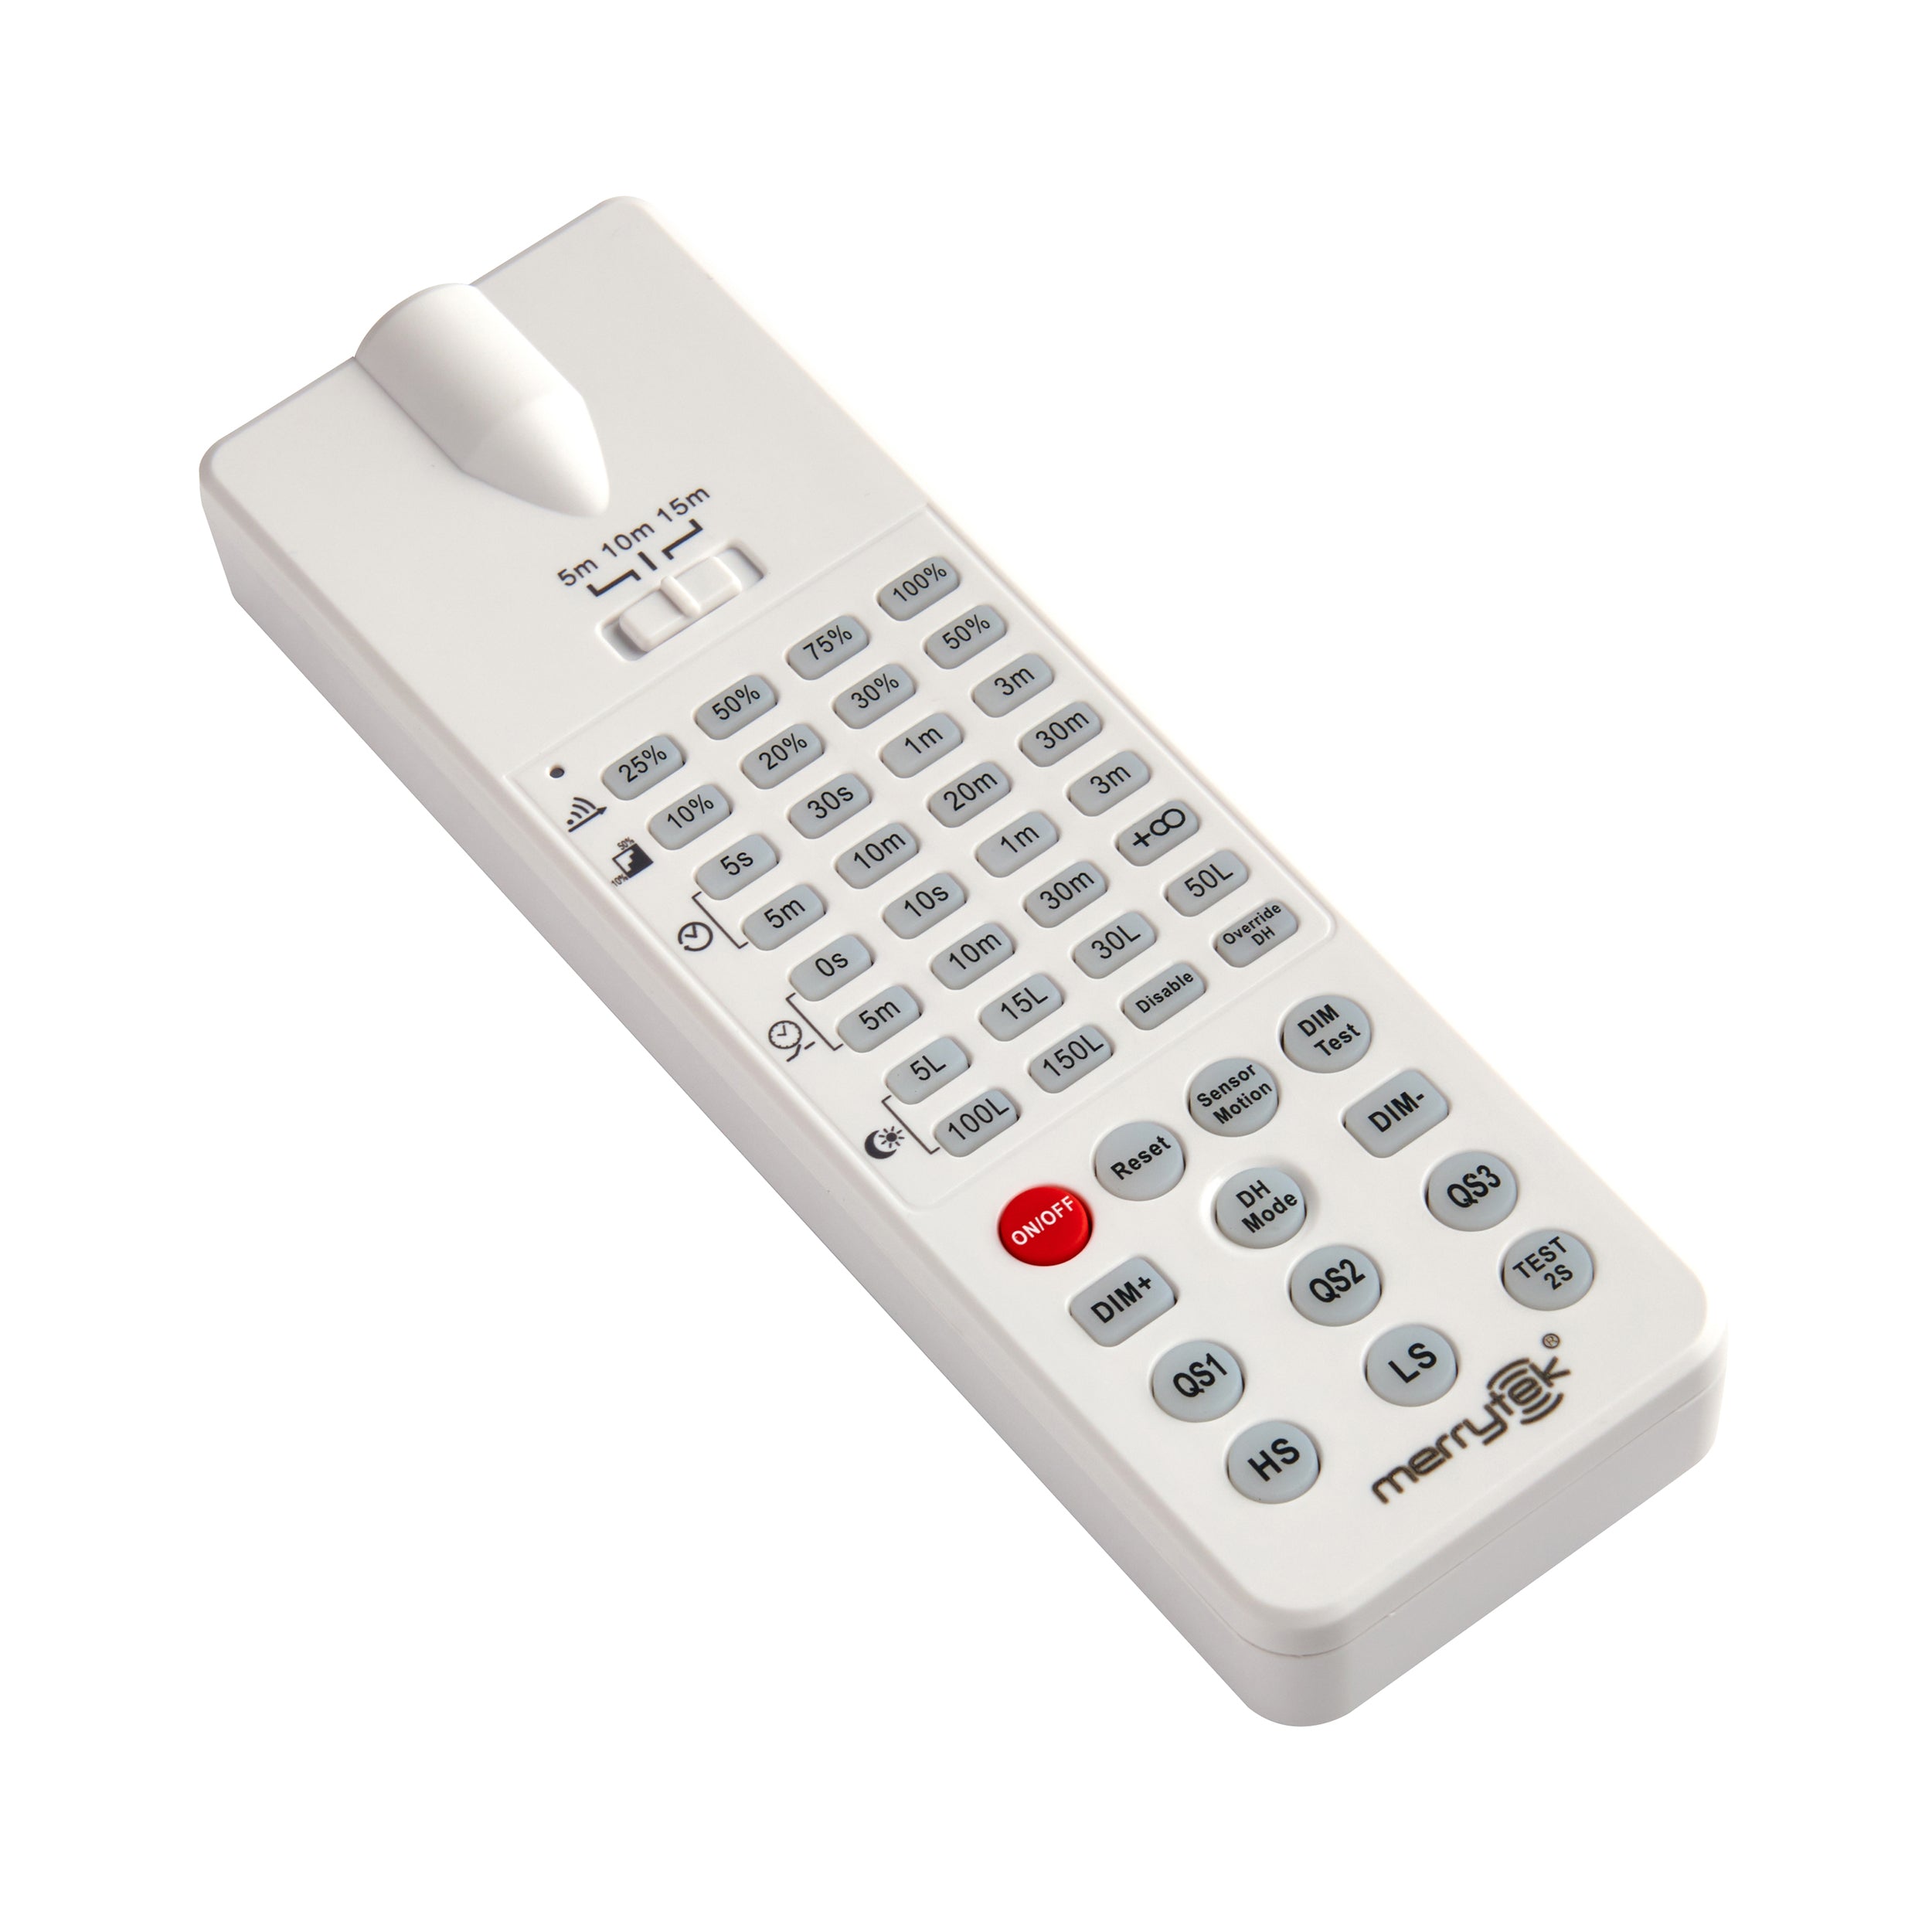 Helios Remote Control For Programming Sensor on High Bay Lights